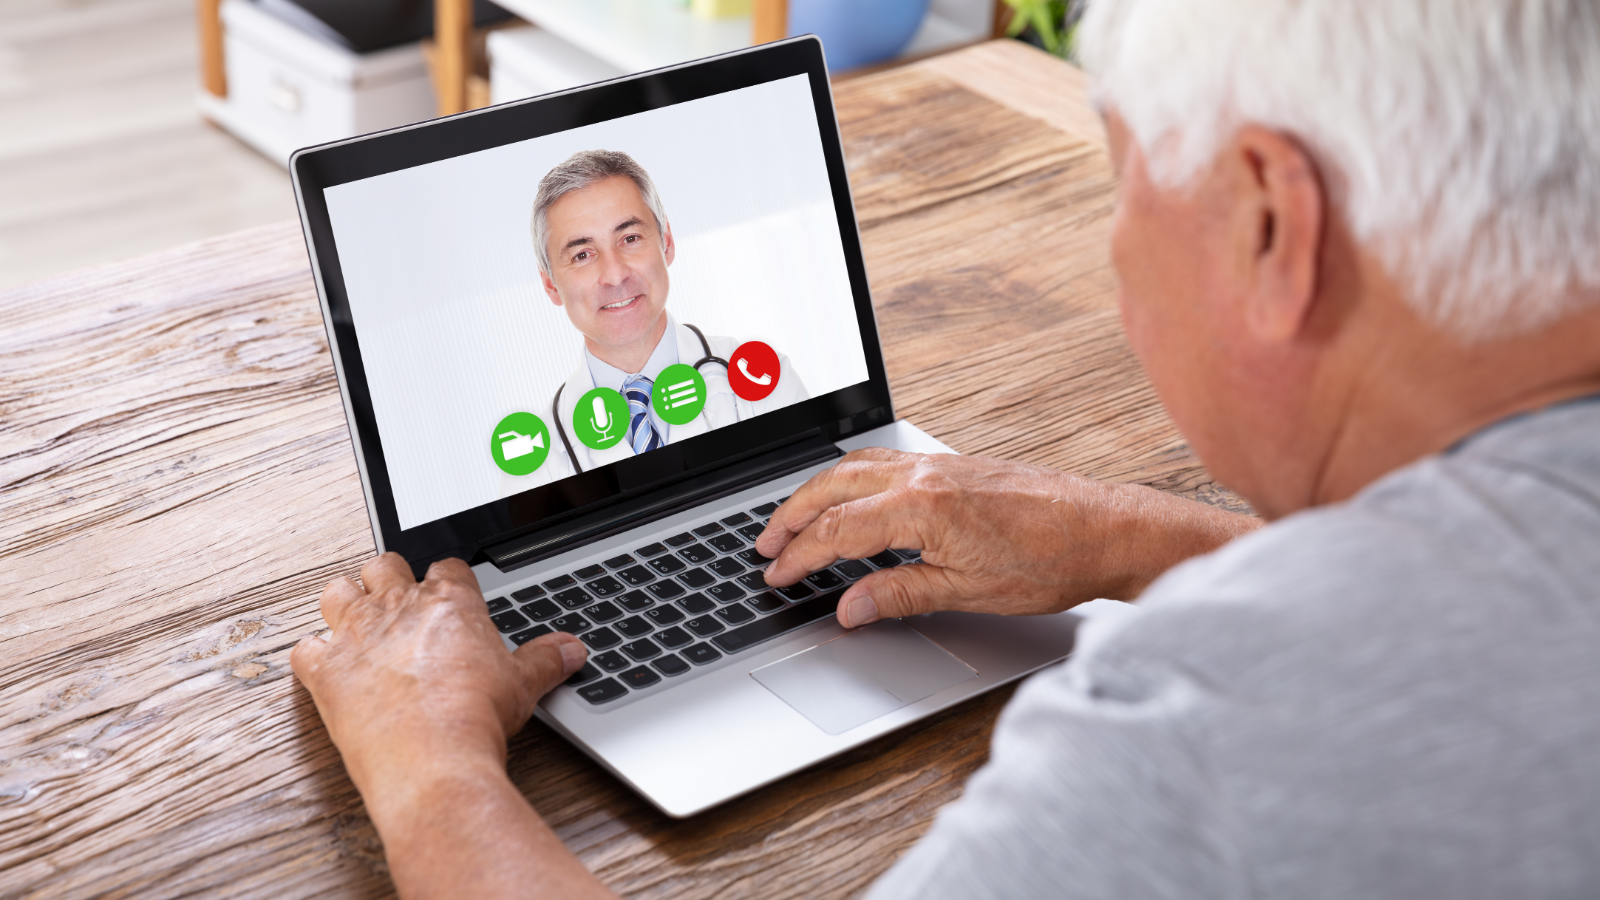 Patient and doctor conducting a telehealth video consultation